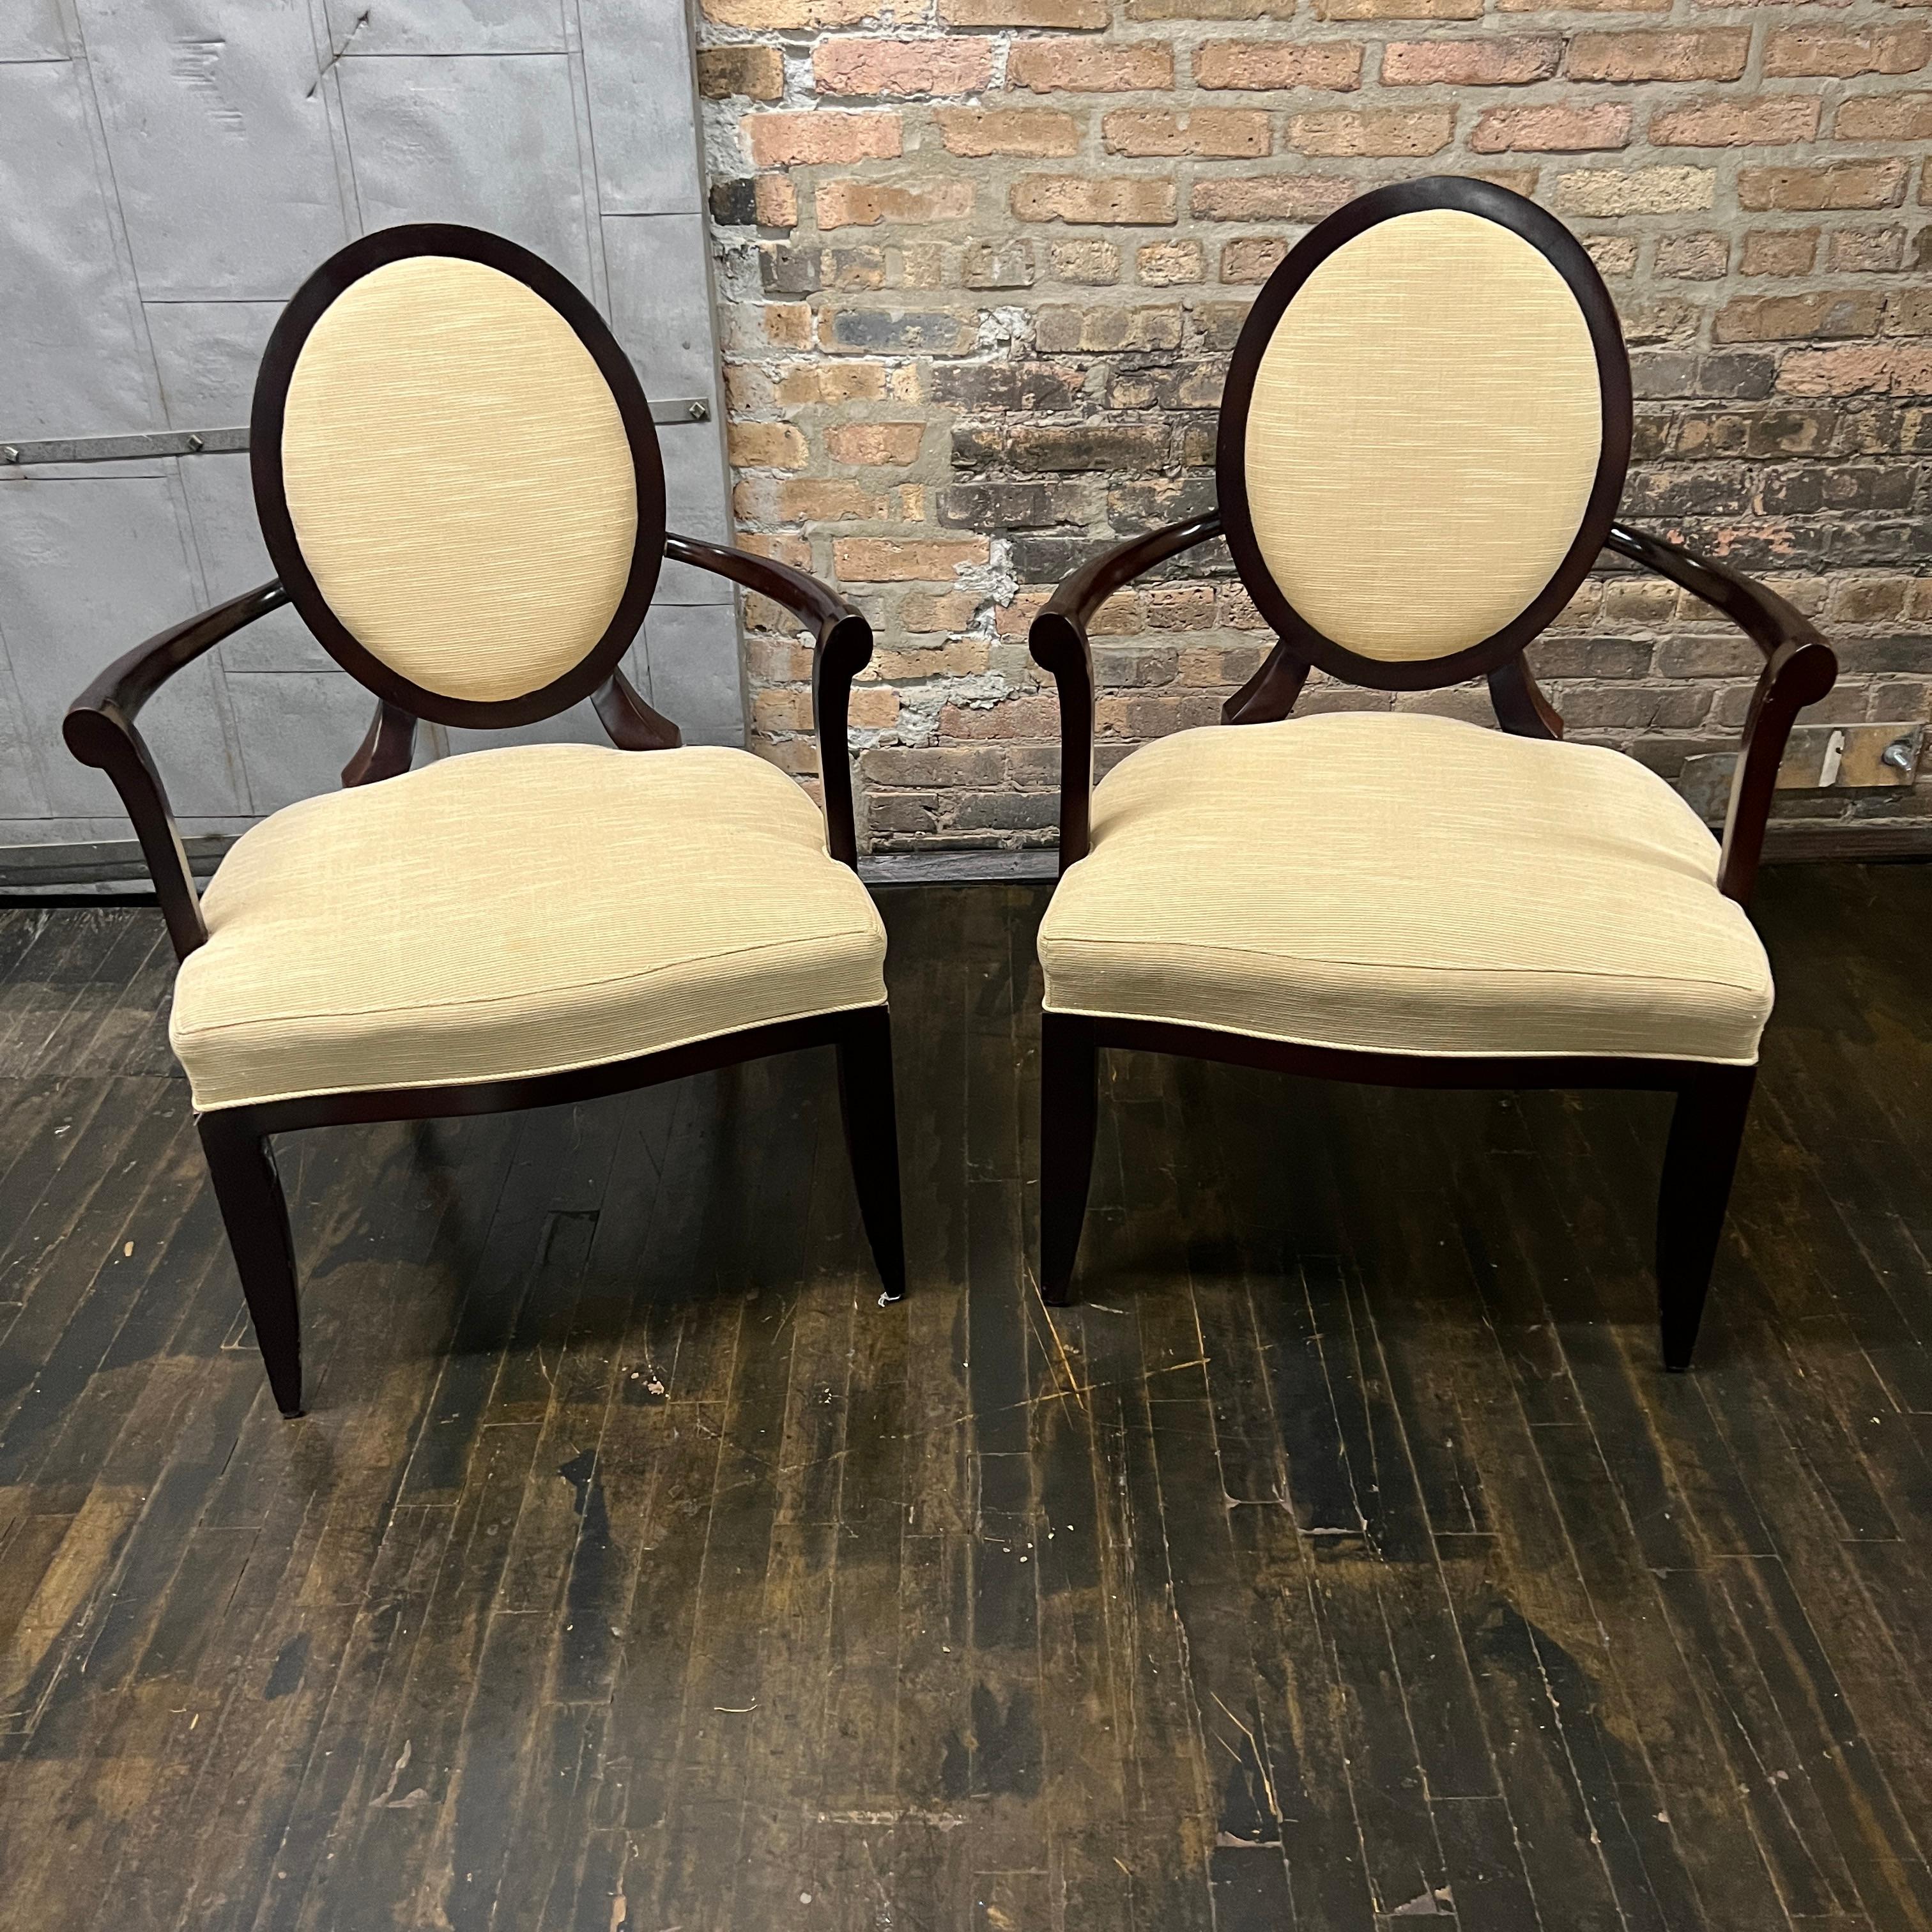 A set of 2 X back dining chairs with arms designed by Barbara Barry for Baker.  These chairs are still in production today (and sell for between $3K - $4K per chair). These are super solid, highly quality dining chairs. 

The upholstery is tan in